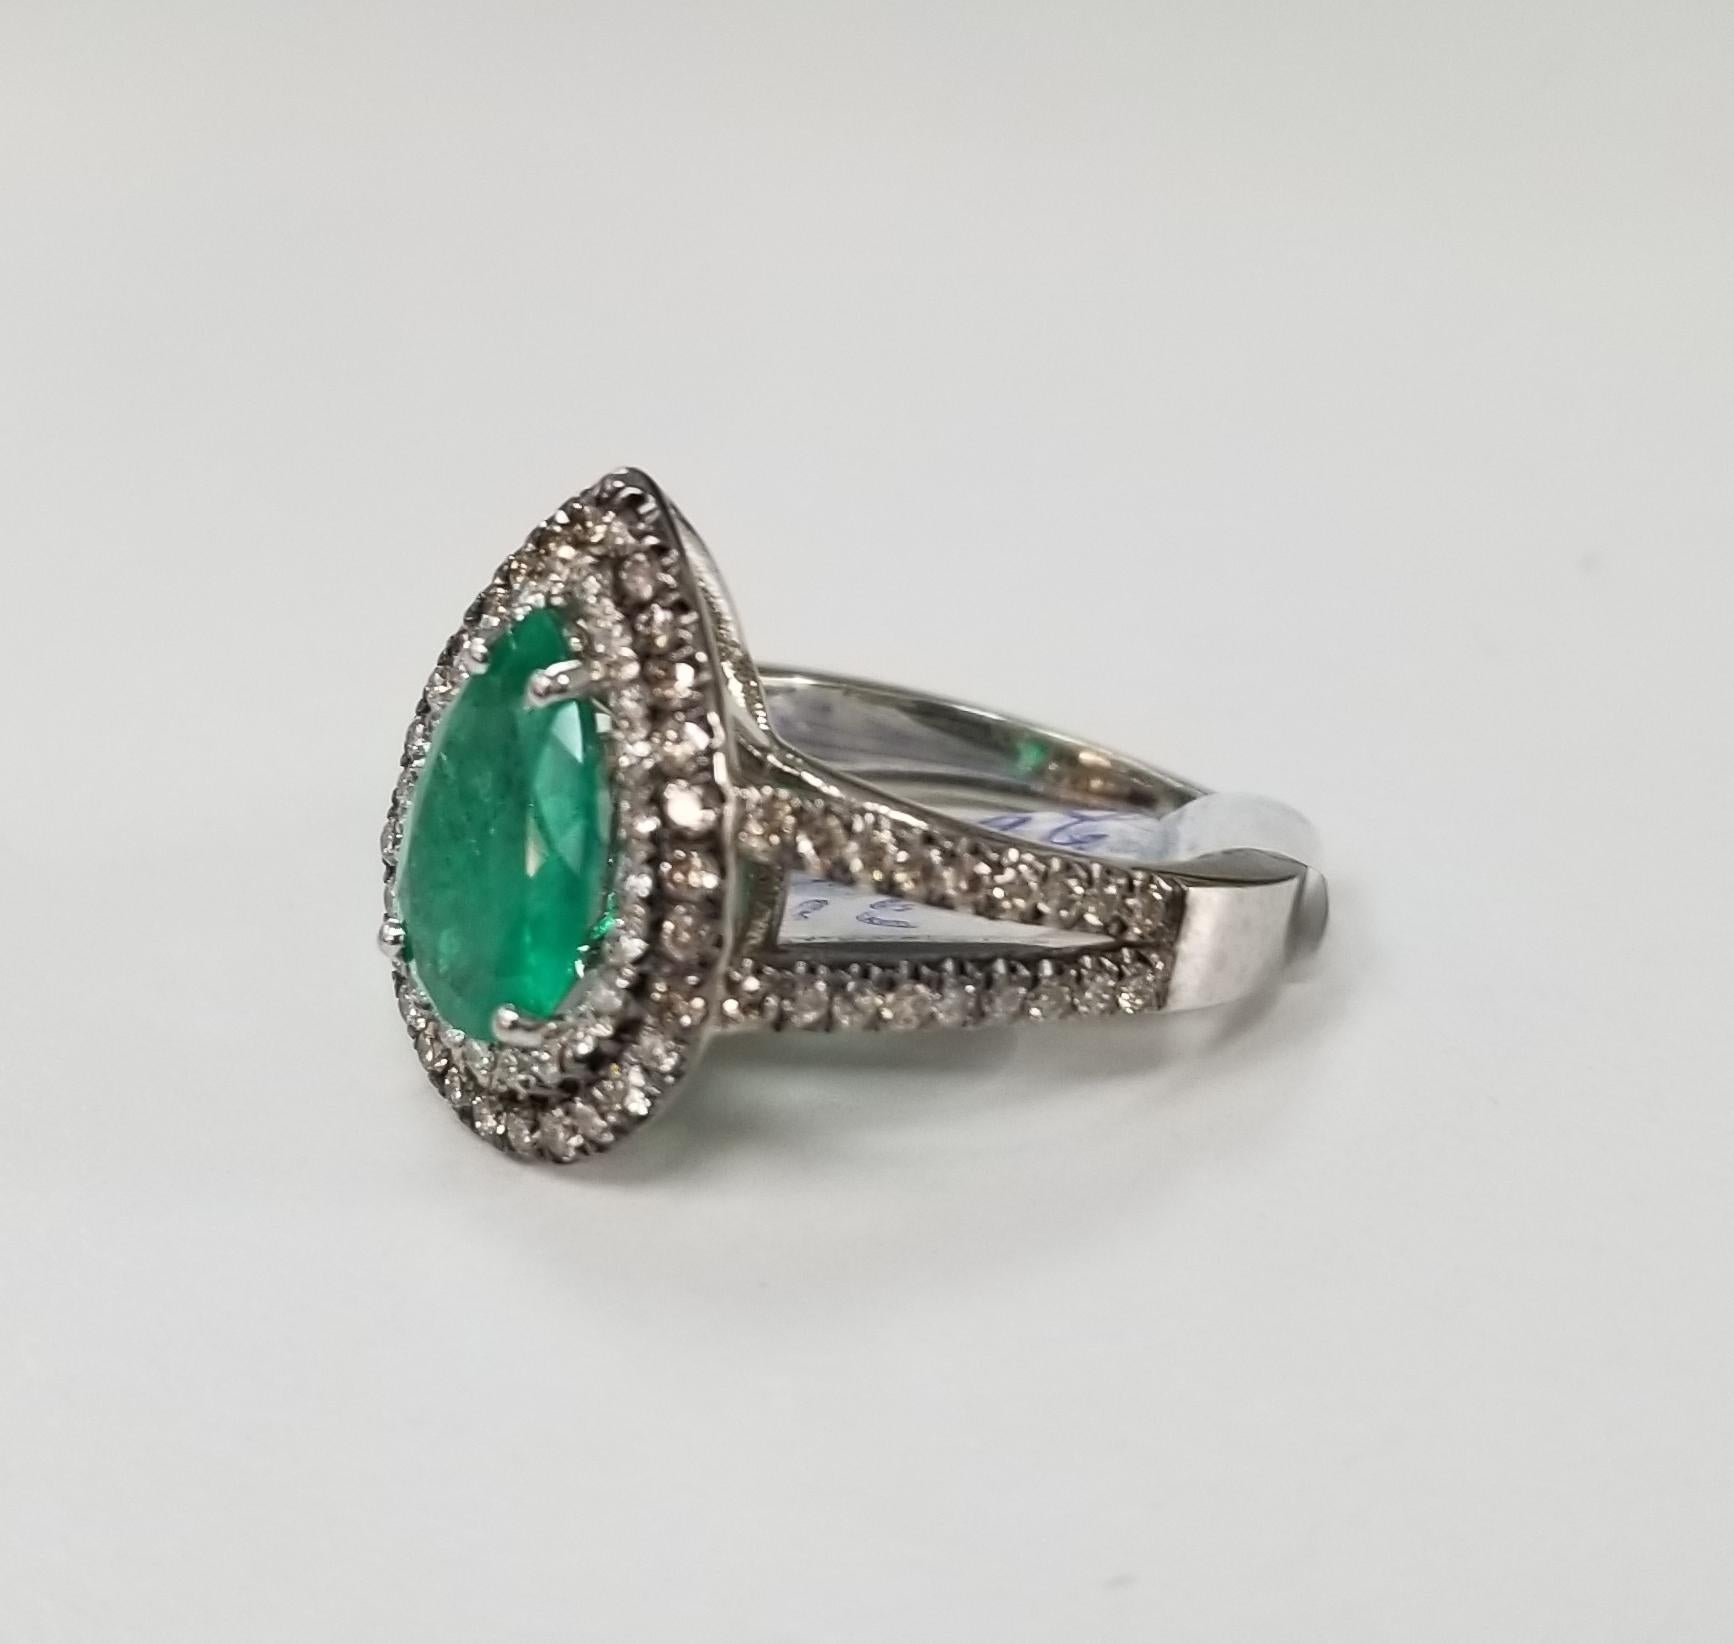 14k white gold pear shape emerald and diamond double halo ring, containing 1 pear shape cut emerald of nice quality weighing 2.20cts. and 91 round full cut white and champagne diamonds of very fine quality weighing 1.40cts. ring is size is 6.5